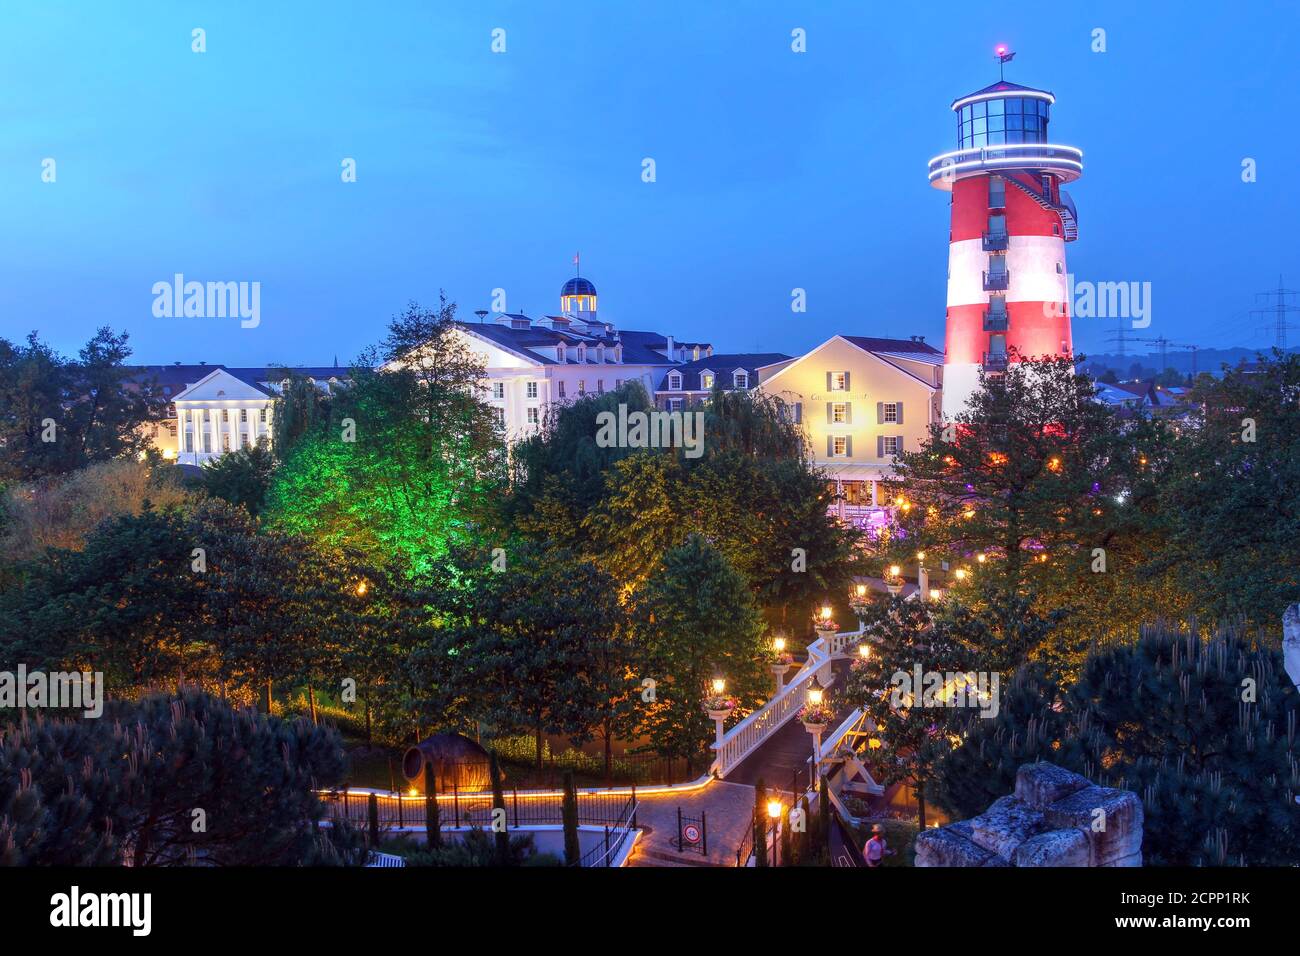 Rust, Germany - May 15, 2015: Skyline view of thematic Hotel Bell Rock in Europa Park, Rust, Germany. EuropaPark is the largest theme park in Germany Stock Photo